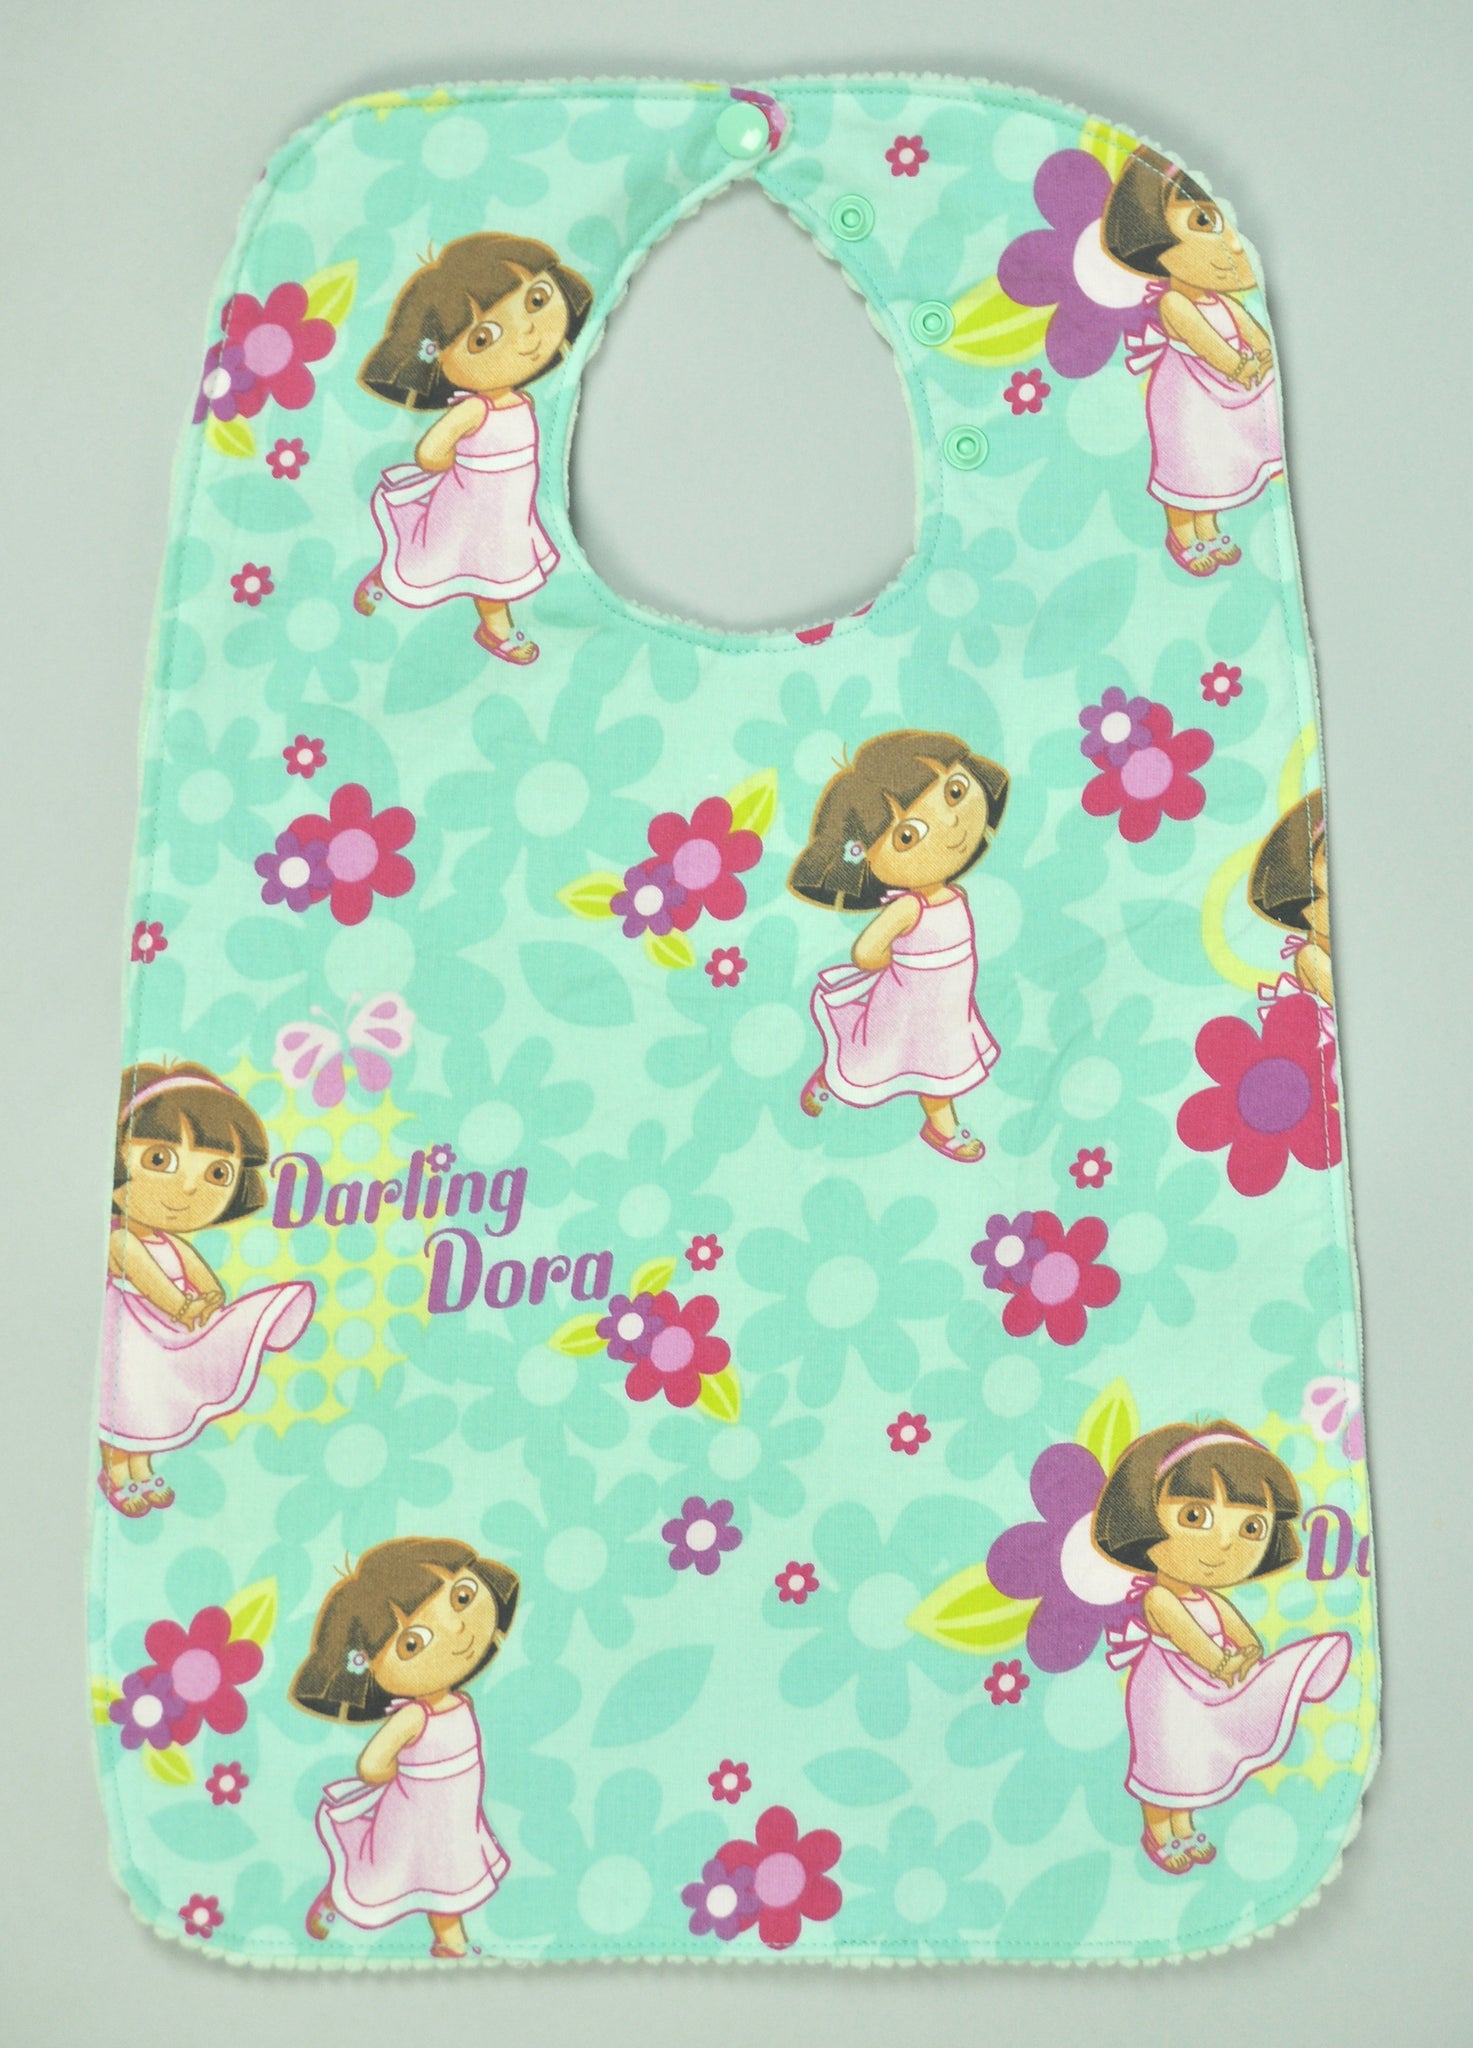 Super bibs! Wider and longer with an adustable neck opening for the perfect fit - Dora the Explorer